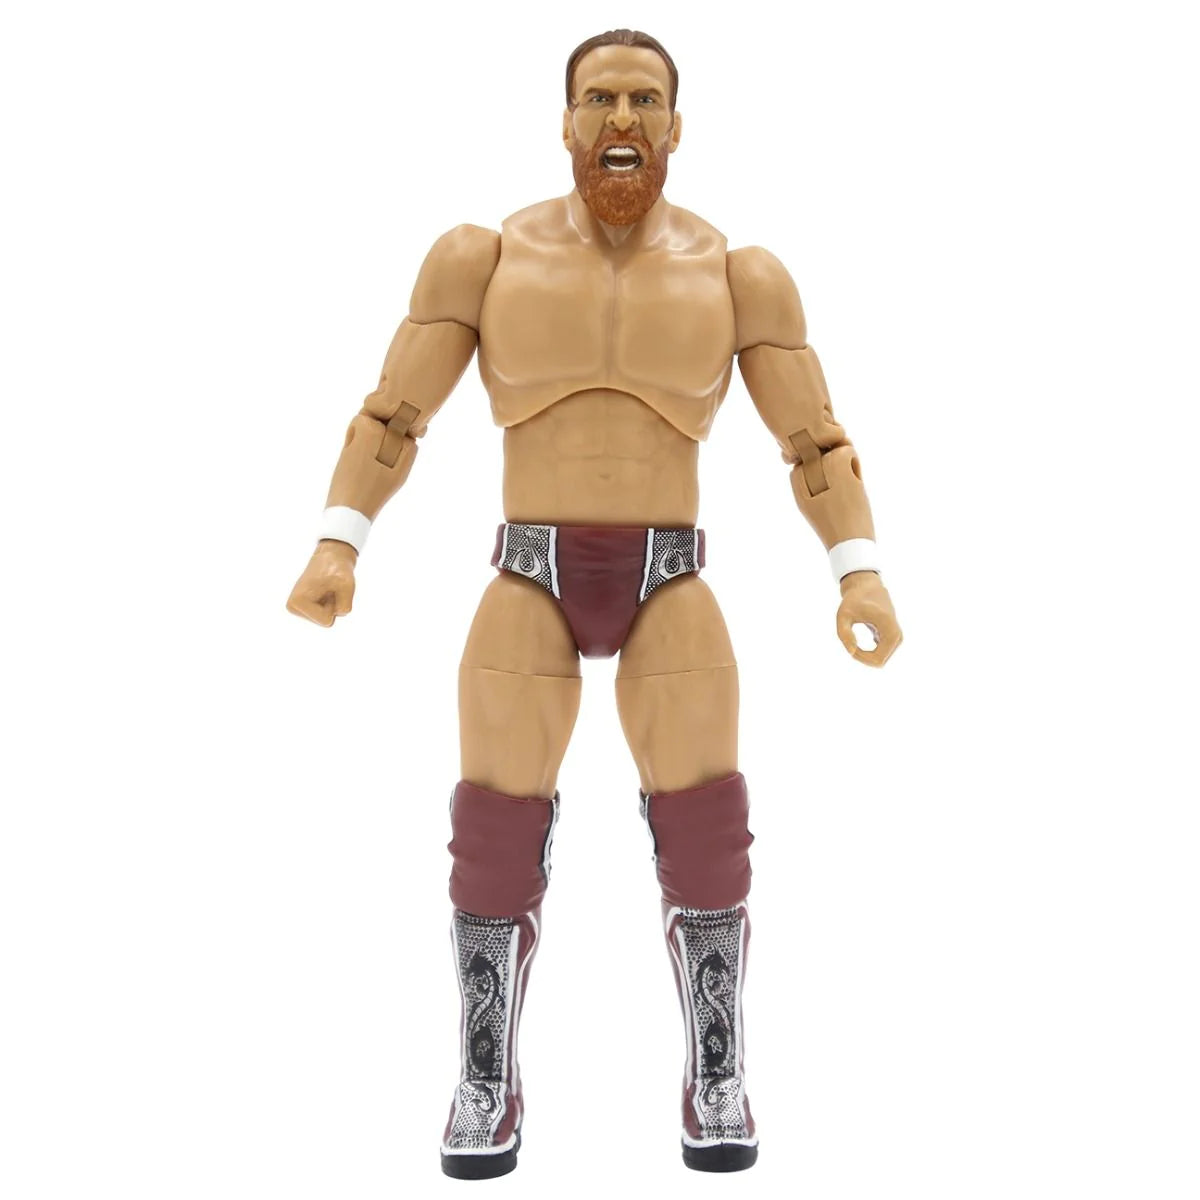 Bryan Danielson - AEW Unmatched Series 5 Action Figure